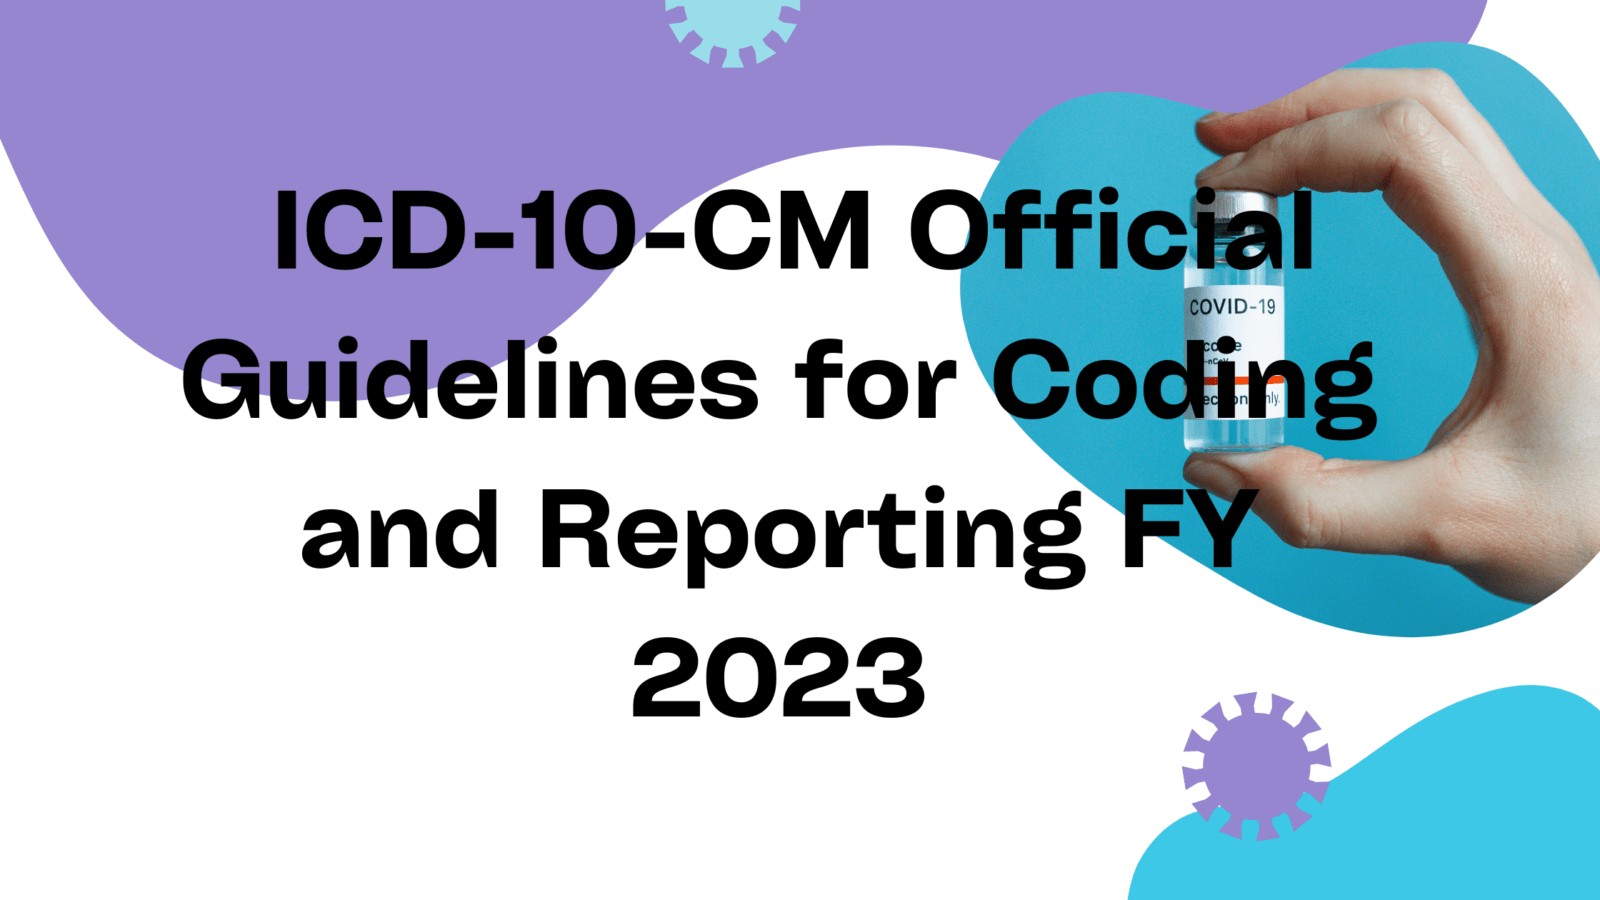 ICD-10-CM Official Guidelines for Coding and Reporting FY 2023